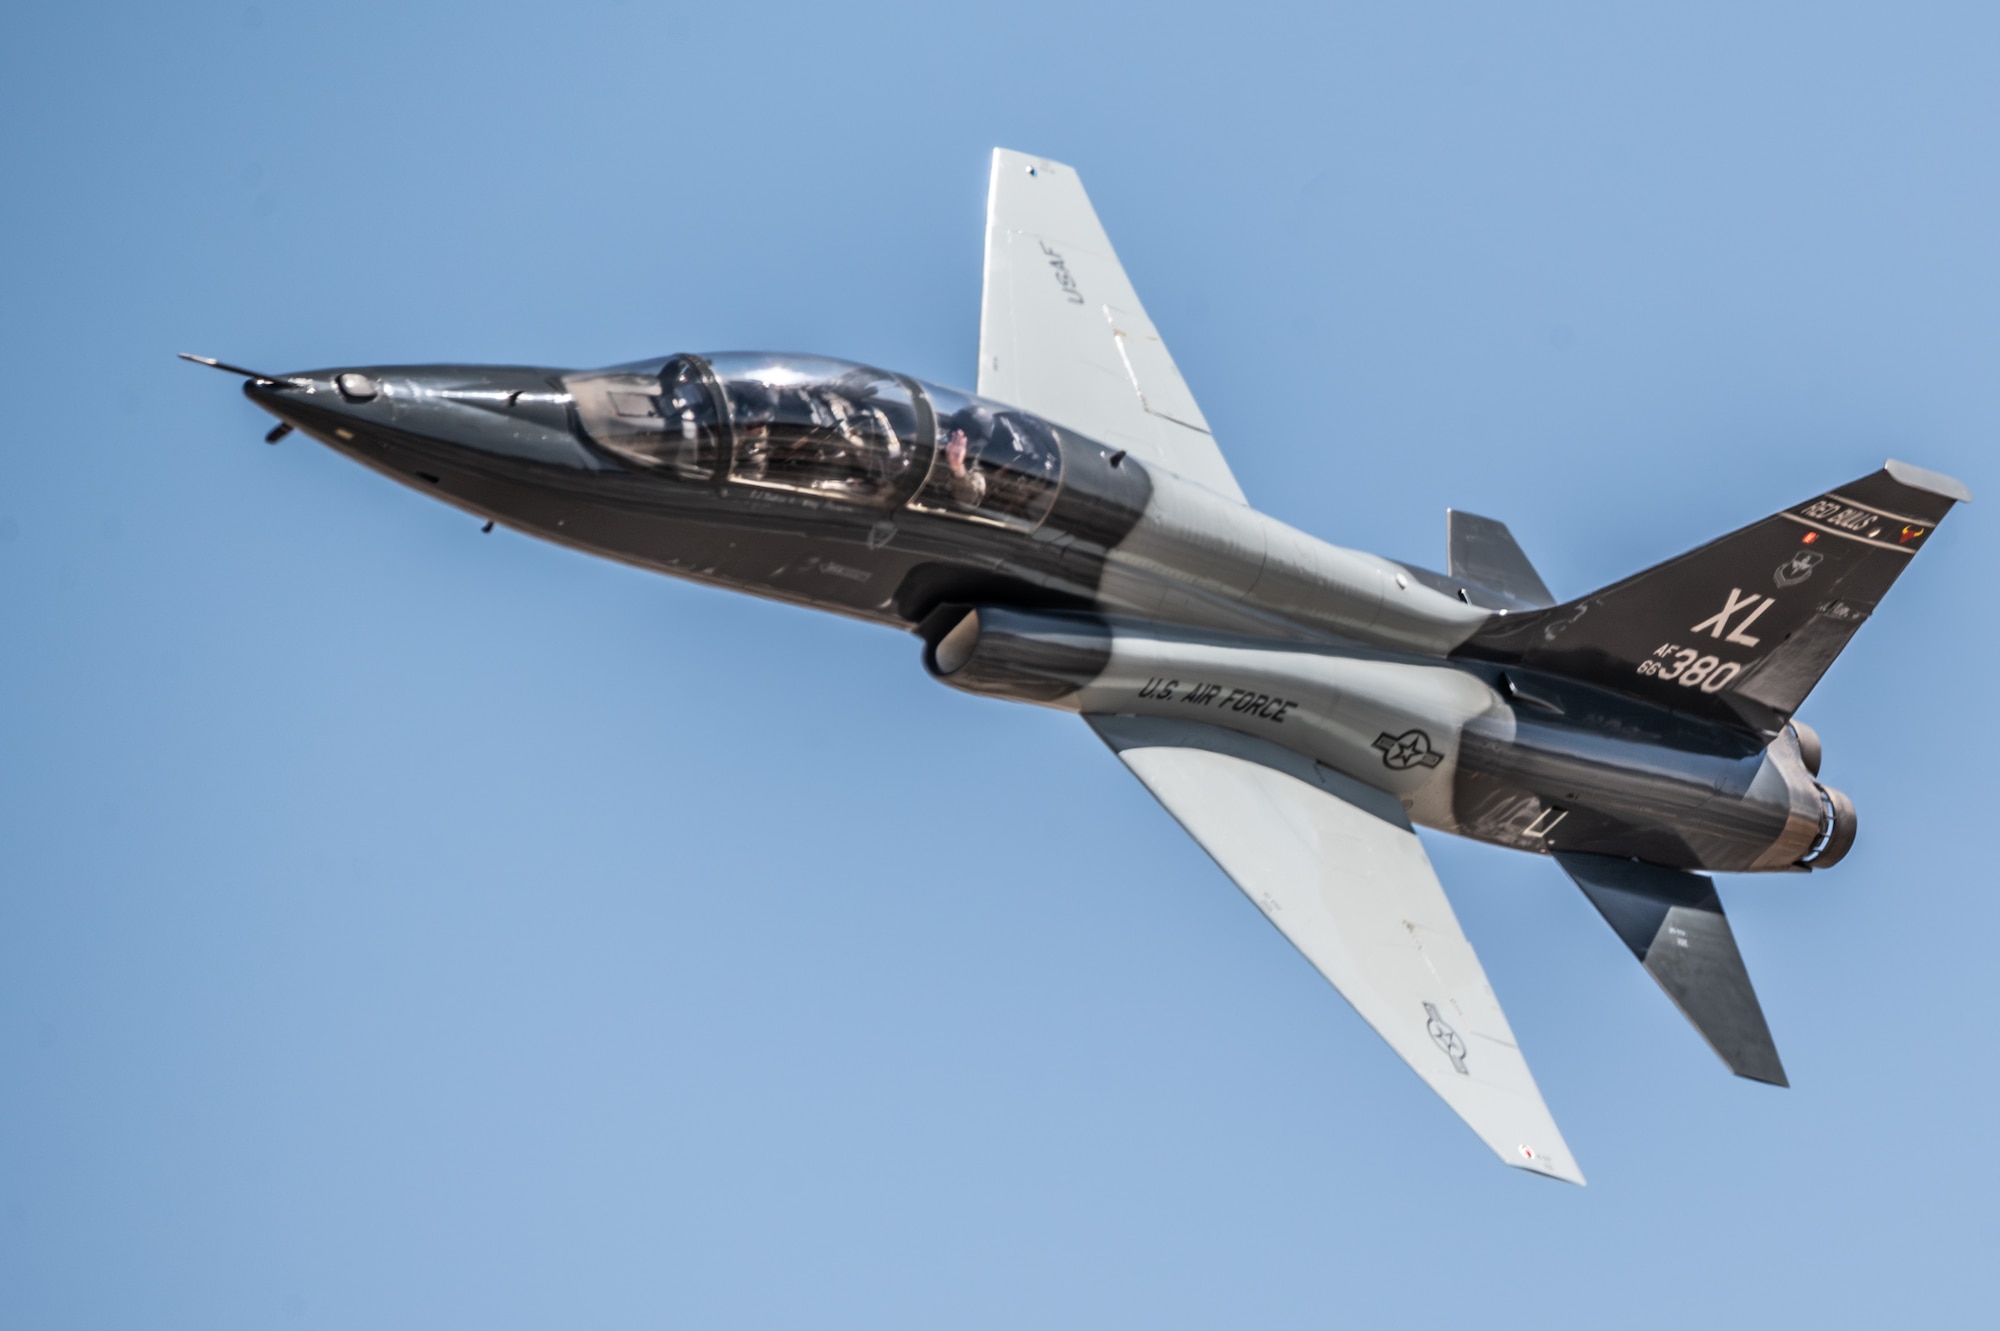 A U.S. Air Force T-38C Talon flies during the Fiesta of Flight airshow at Laughlin Air Force Base, Texas, March 9, 2024. The Laughlin performers flew two T-1A Jayhawks, two T-6A Texan II’s and two T-38C Talons. The performance showcased Laughlin’s local aircraft to approximately 16,000 attendees at the Fiesta of Flight airshow. (U.S. Air Force photo by Airman 1st Class Keira Rossman)